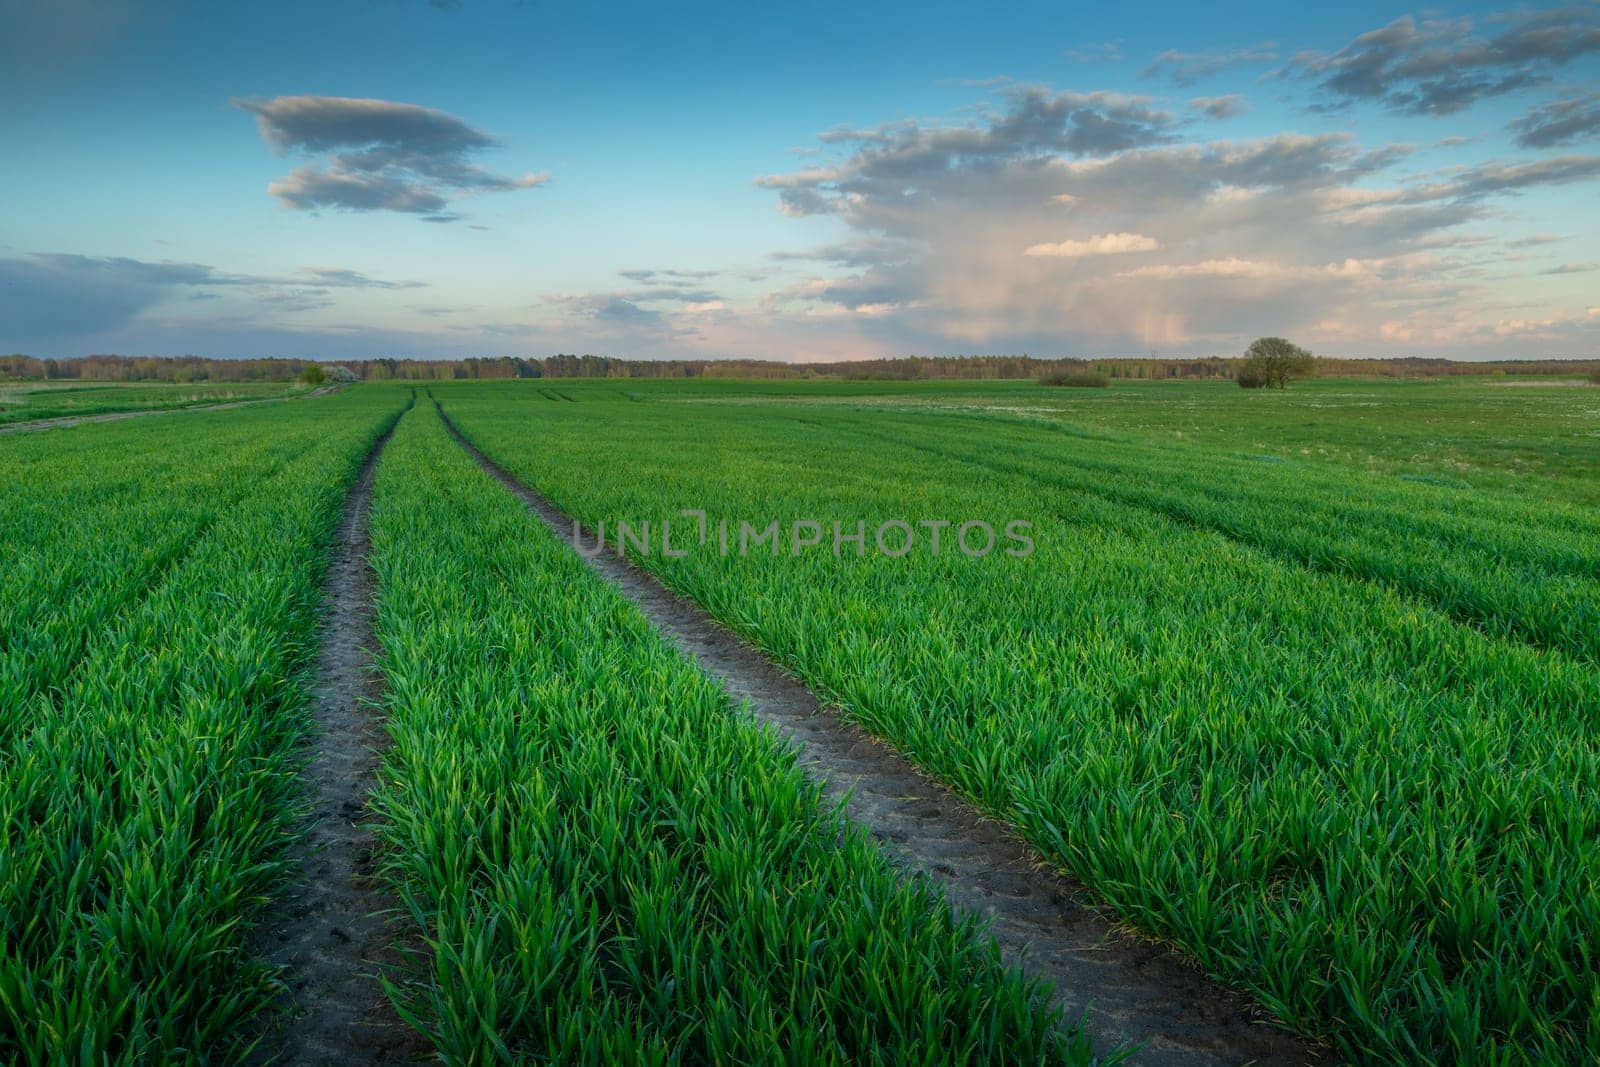 Technological path in fresh green field, evening view, eastern Poland